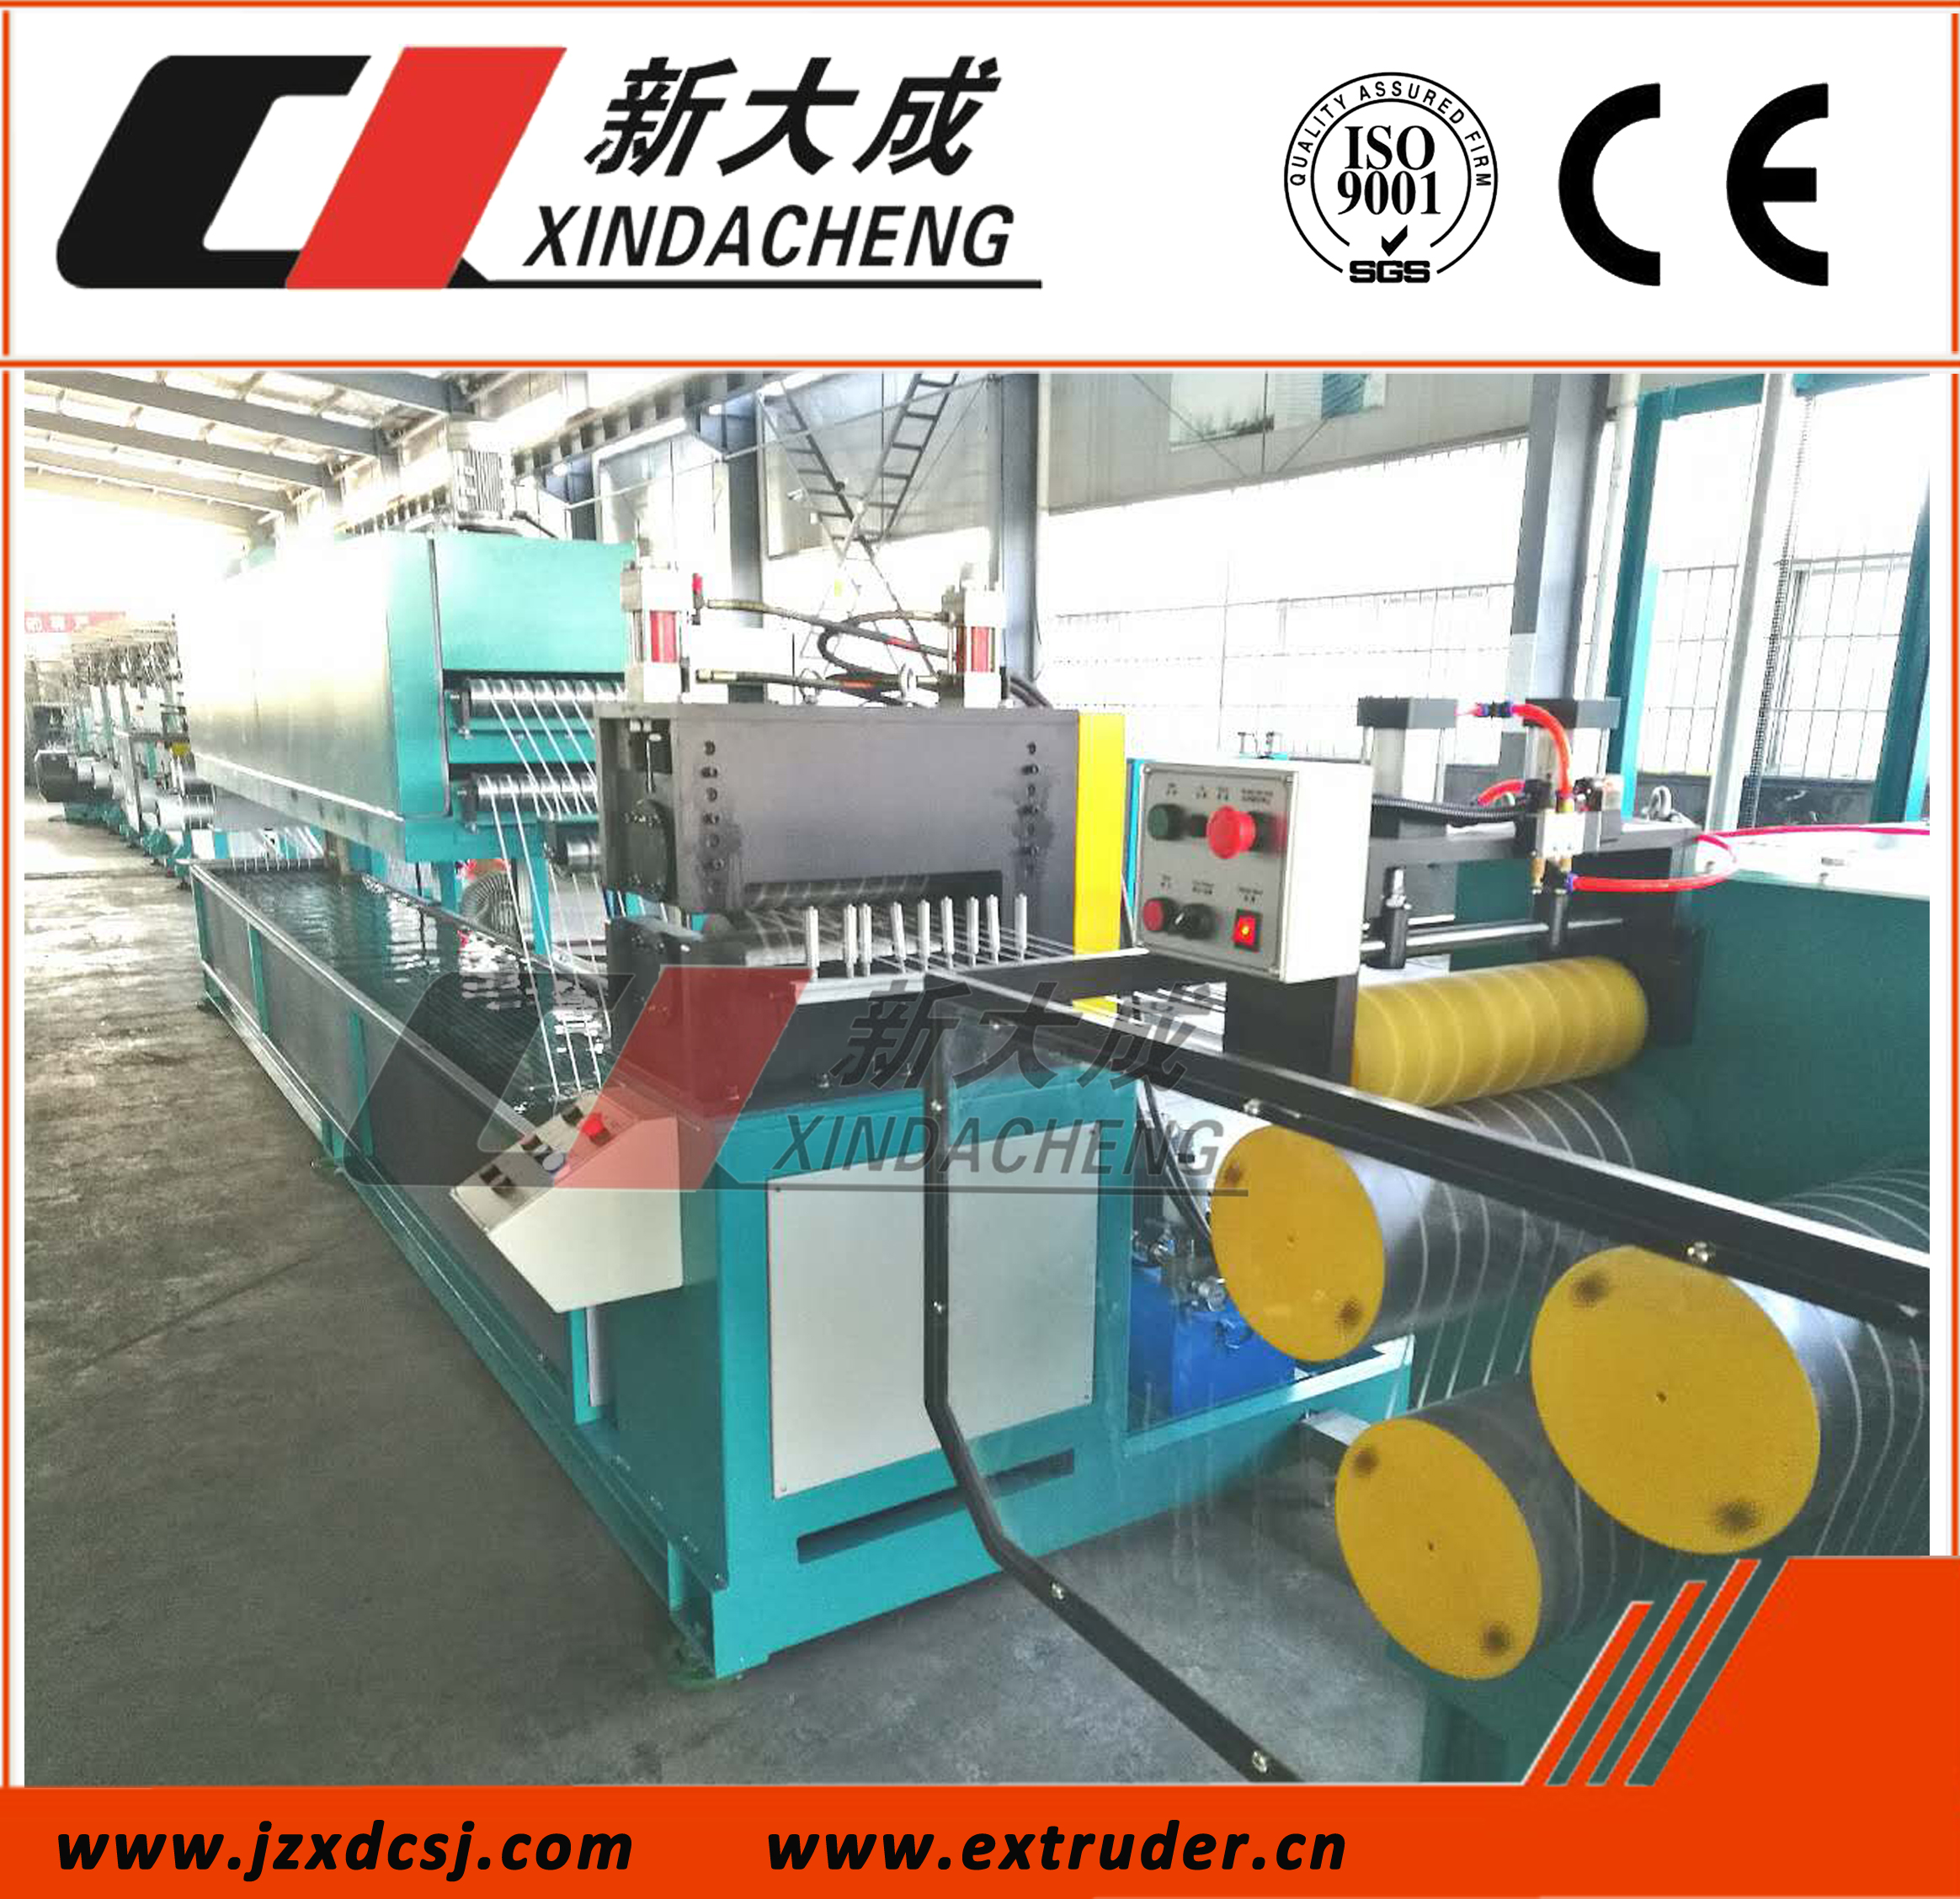 Export: PET & PP strapping Production line (Extrusion 8 straps)